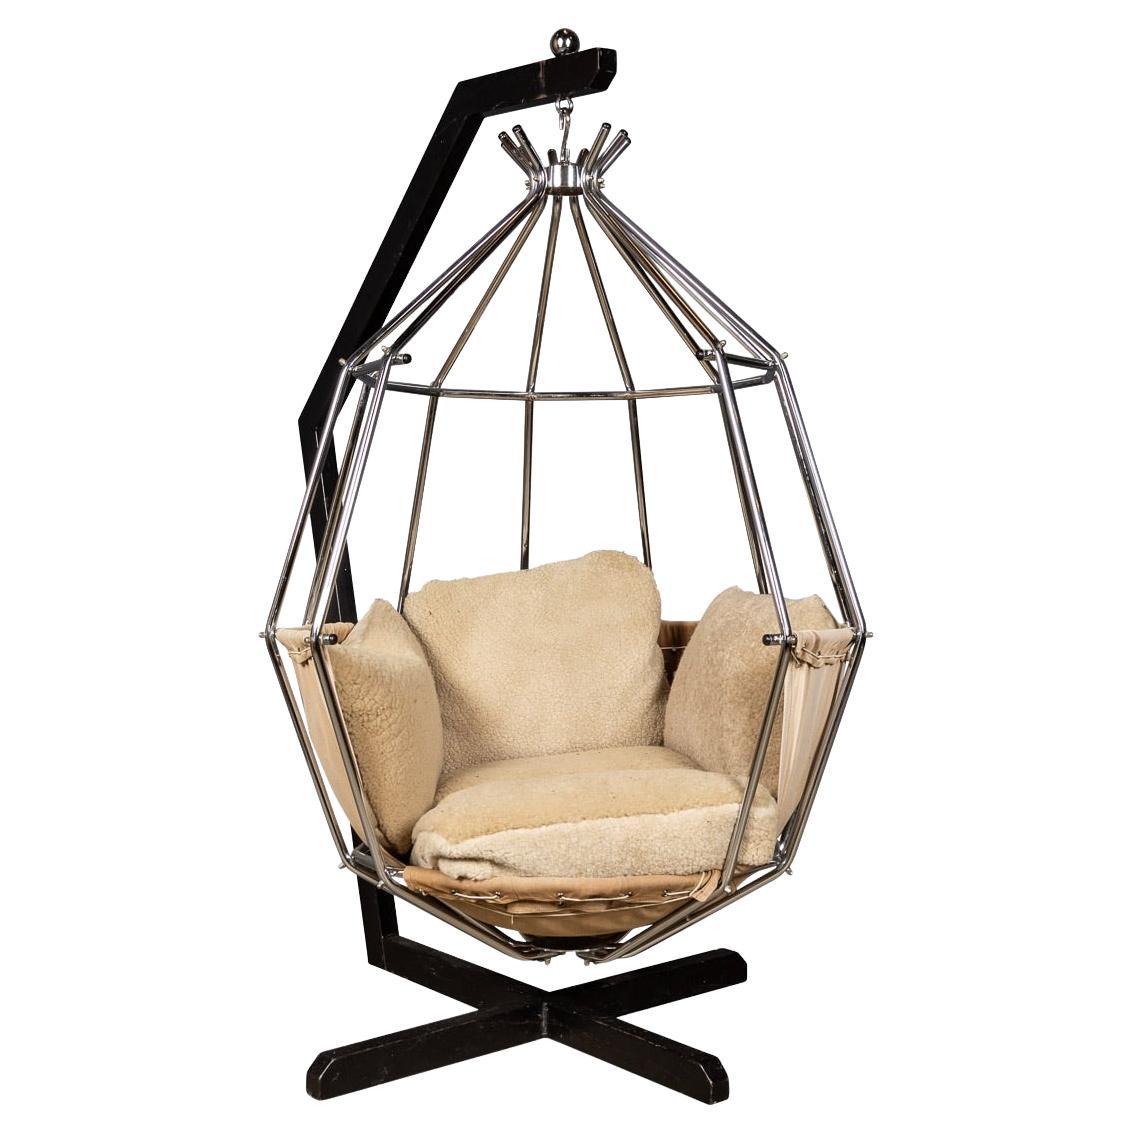 Elegant Parrot Cage Chair by Ib Arberg, c.1970